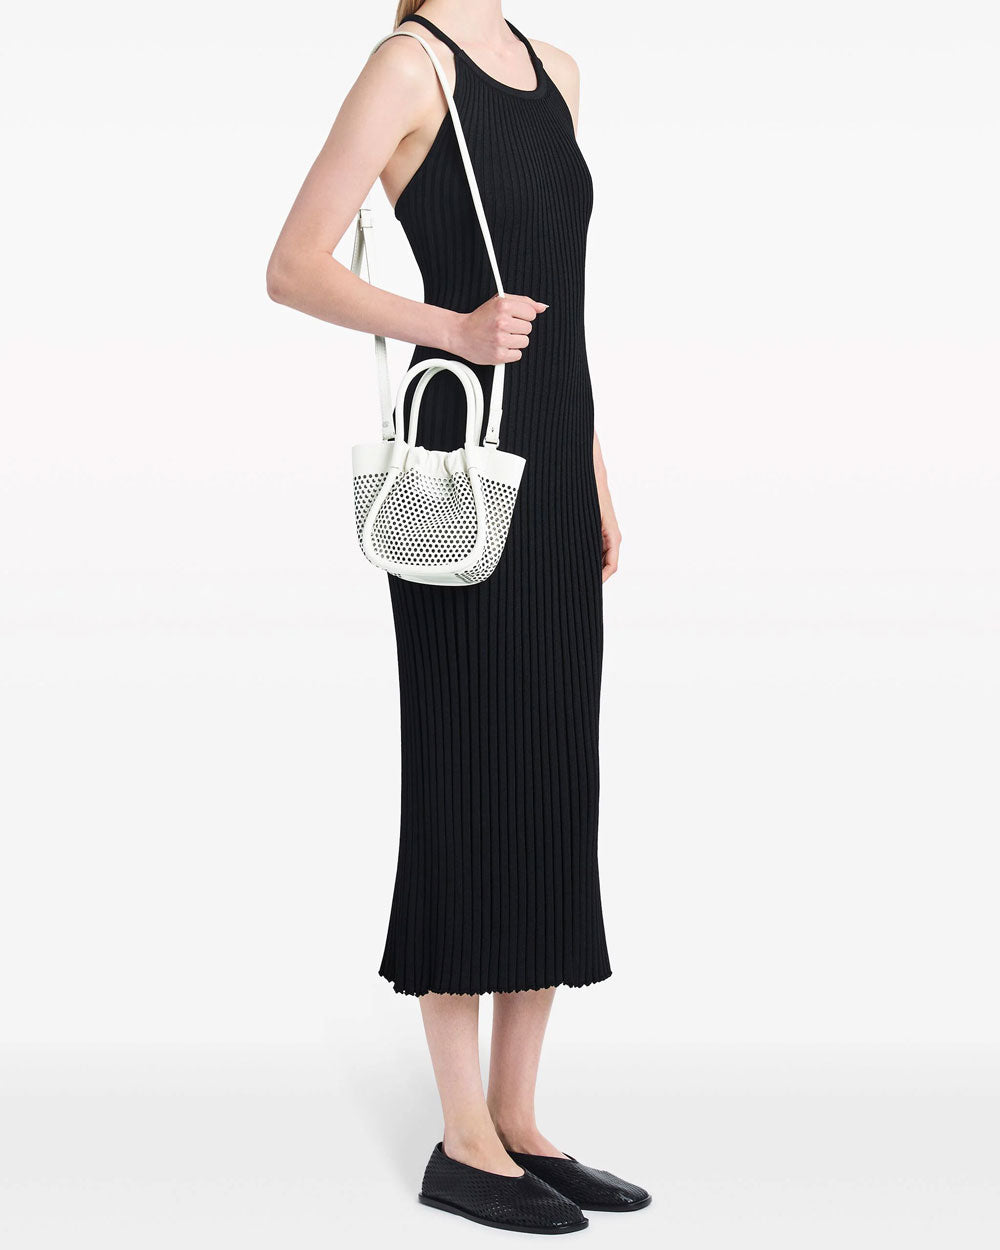 Extra Small Perforated Ruched Tote in White